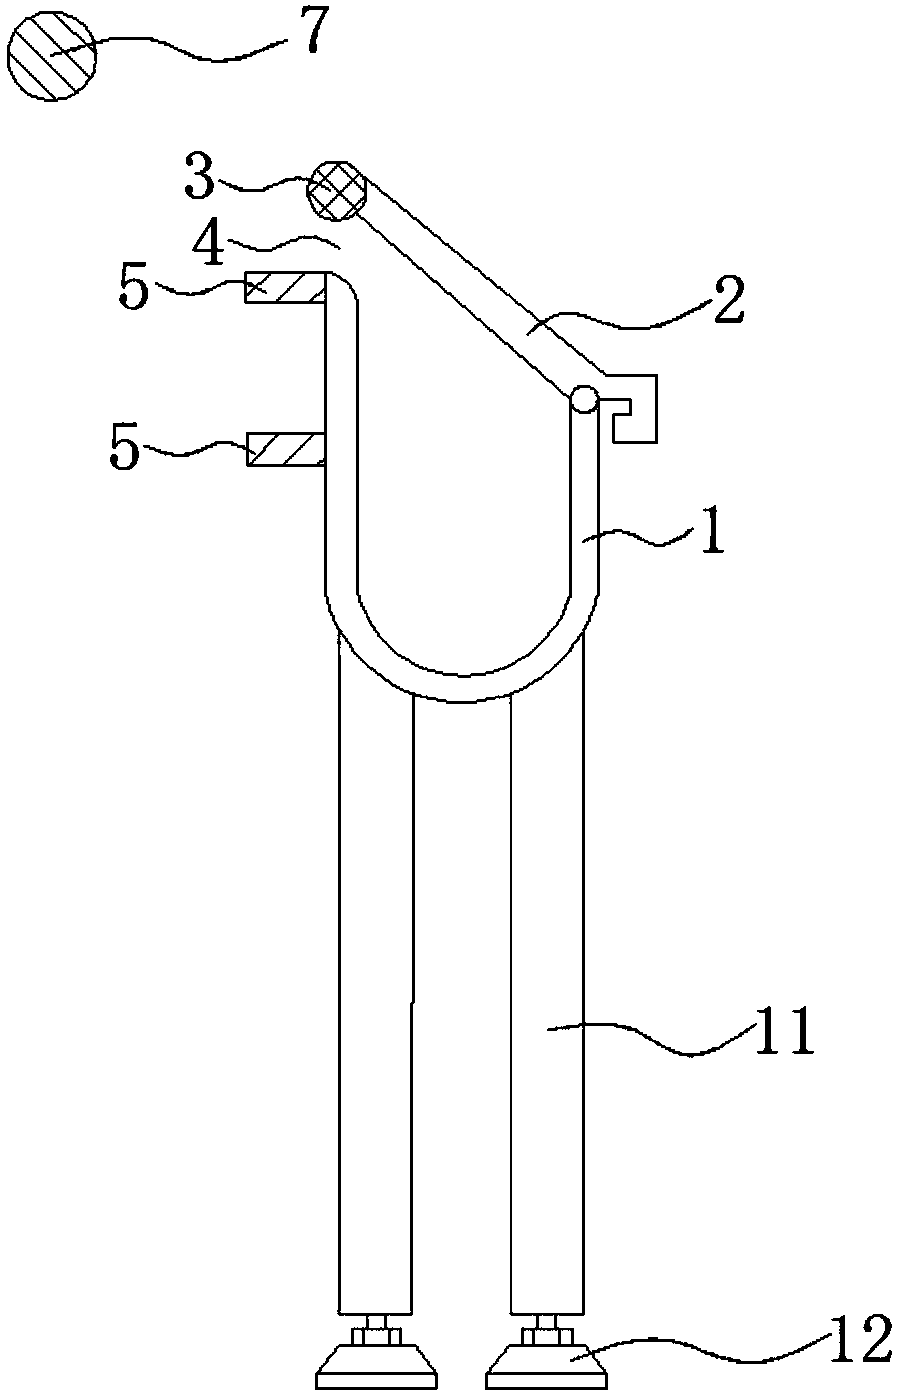 Parallel-type poultry blood collecting device